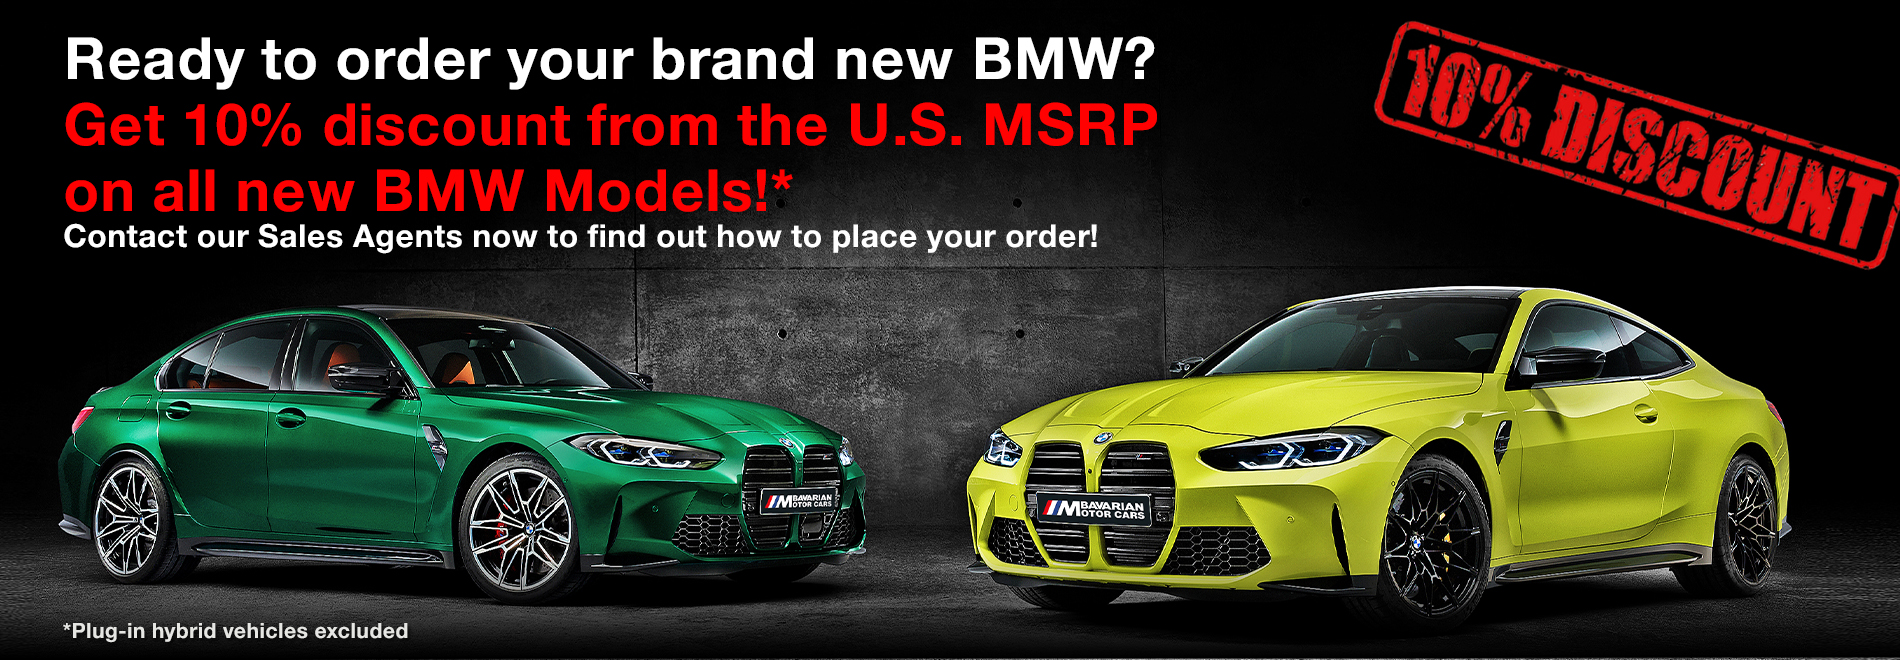 BMW Military Sales | Bavarian Motor Cars  | Special Offer  |  BMW Sale | 